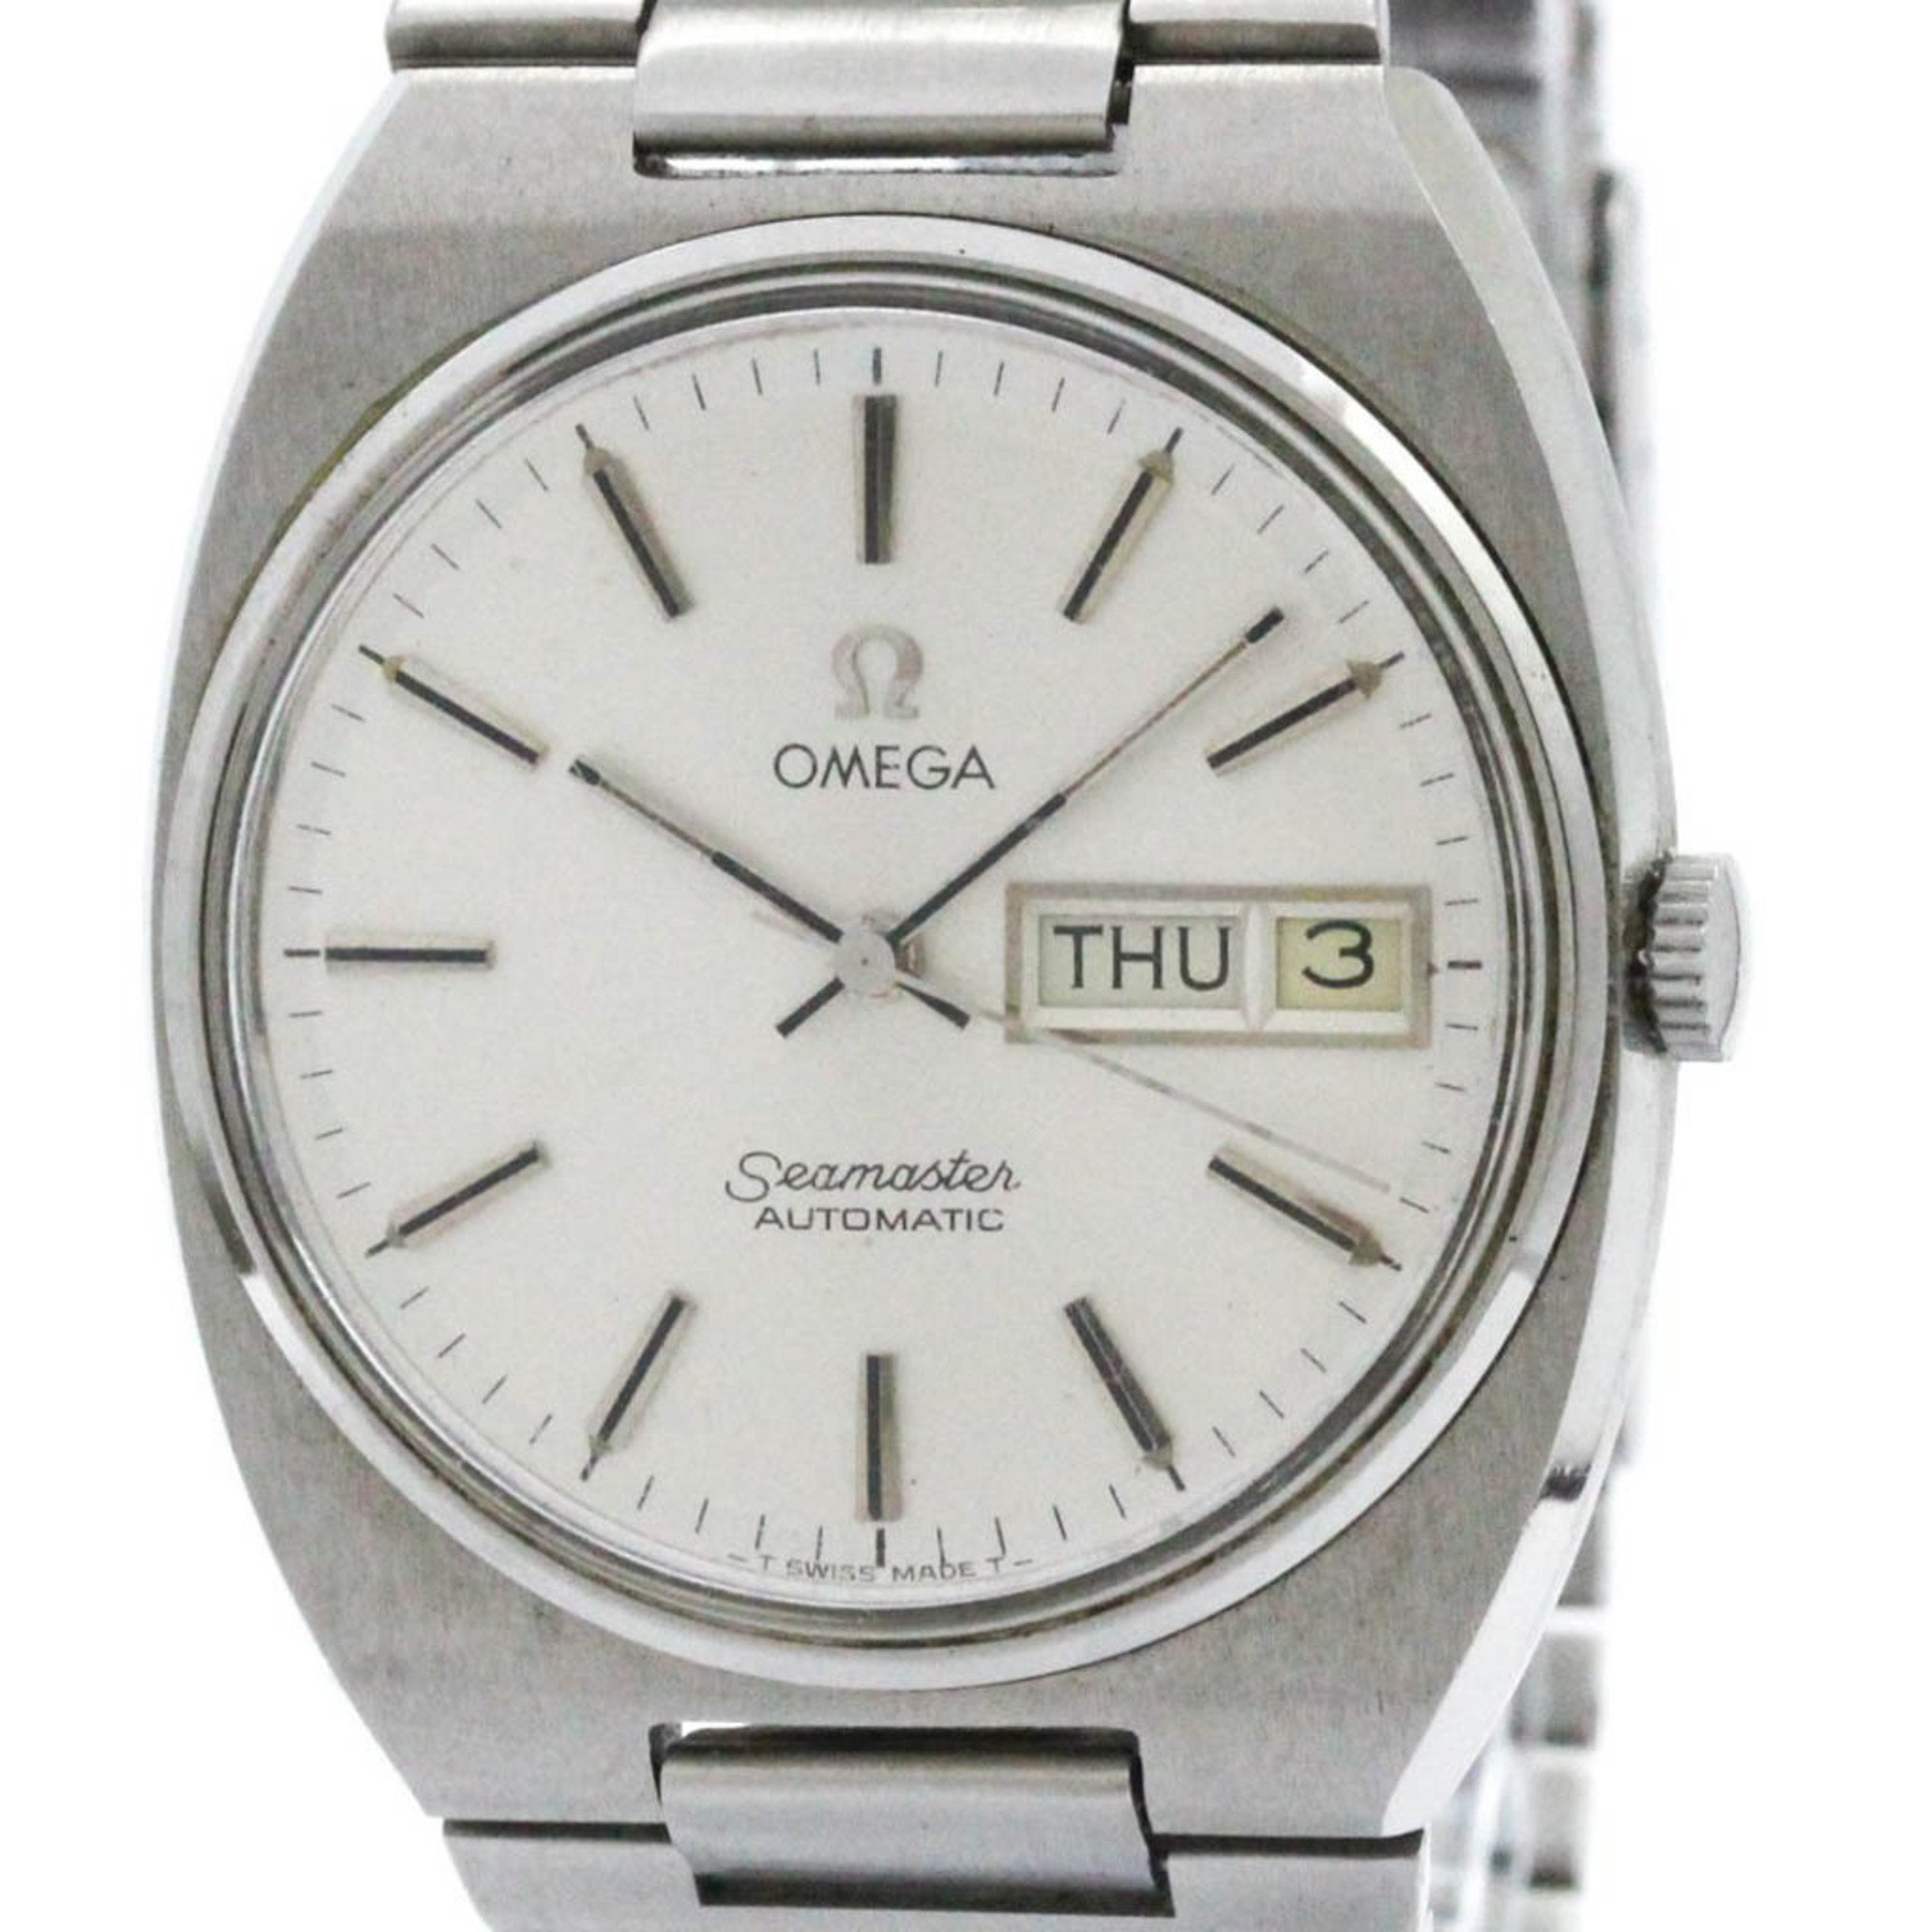 Vintage OMEGA Seamaster Day Date Cal.1020 Steel Mens Watch 166.0216 BF573172